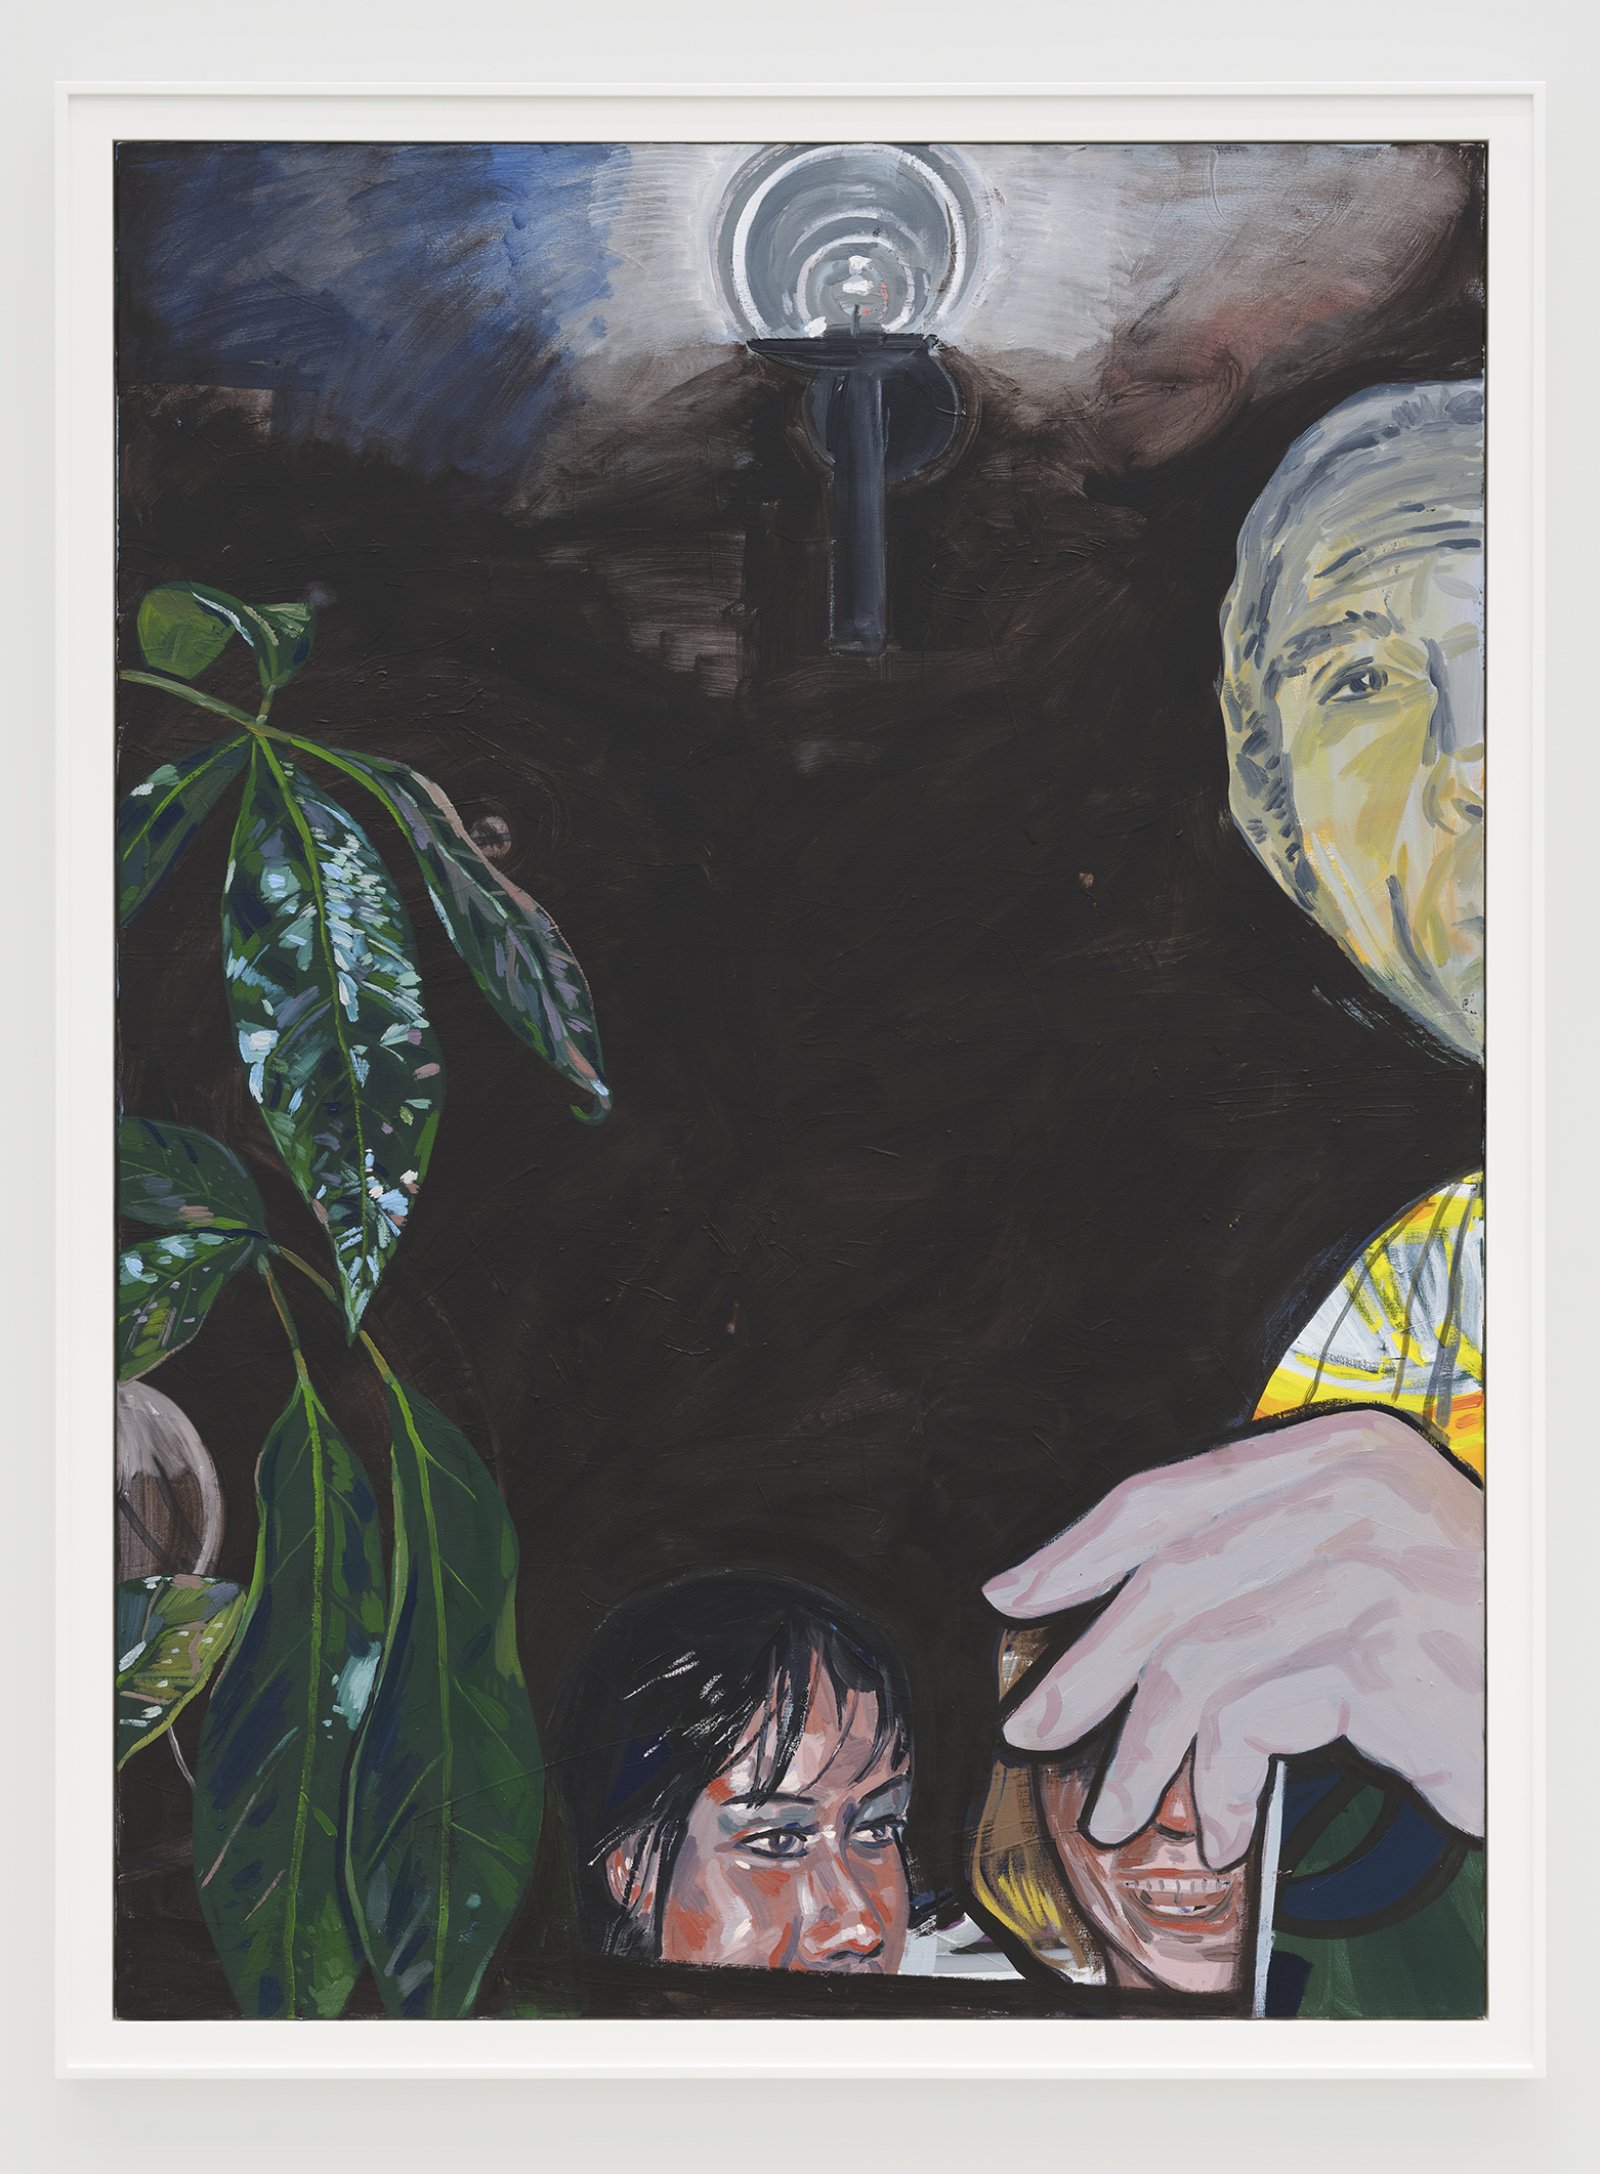 ​Damian Moppett, Untitled (Party with Plant), 2020, oil on canvas, 67 x 50 in. (170 x 127 cm) by Damian Moppett